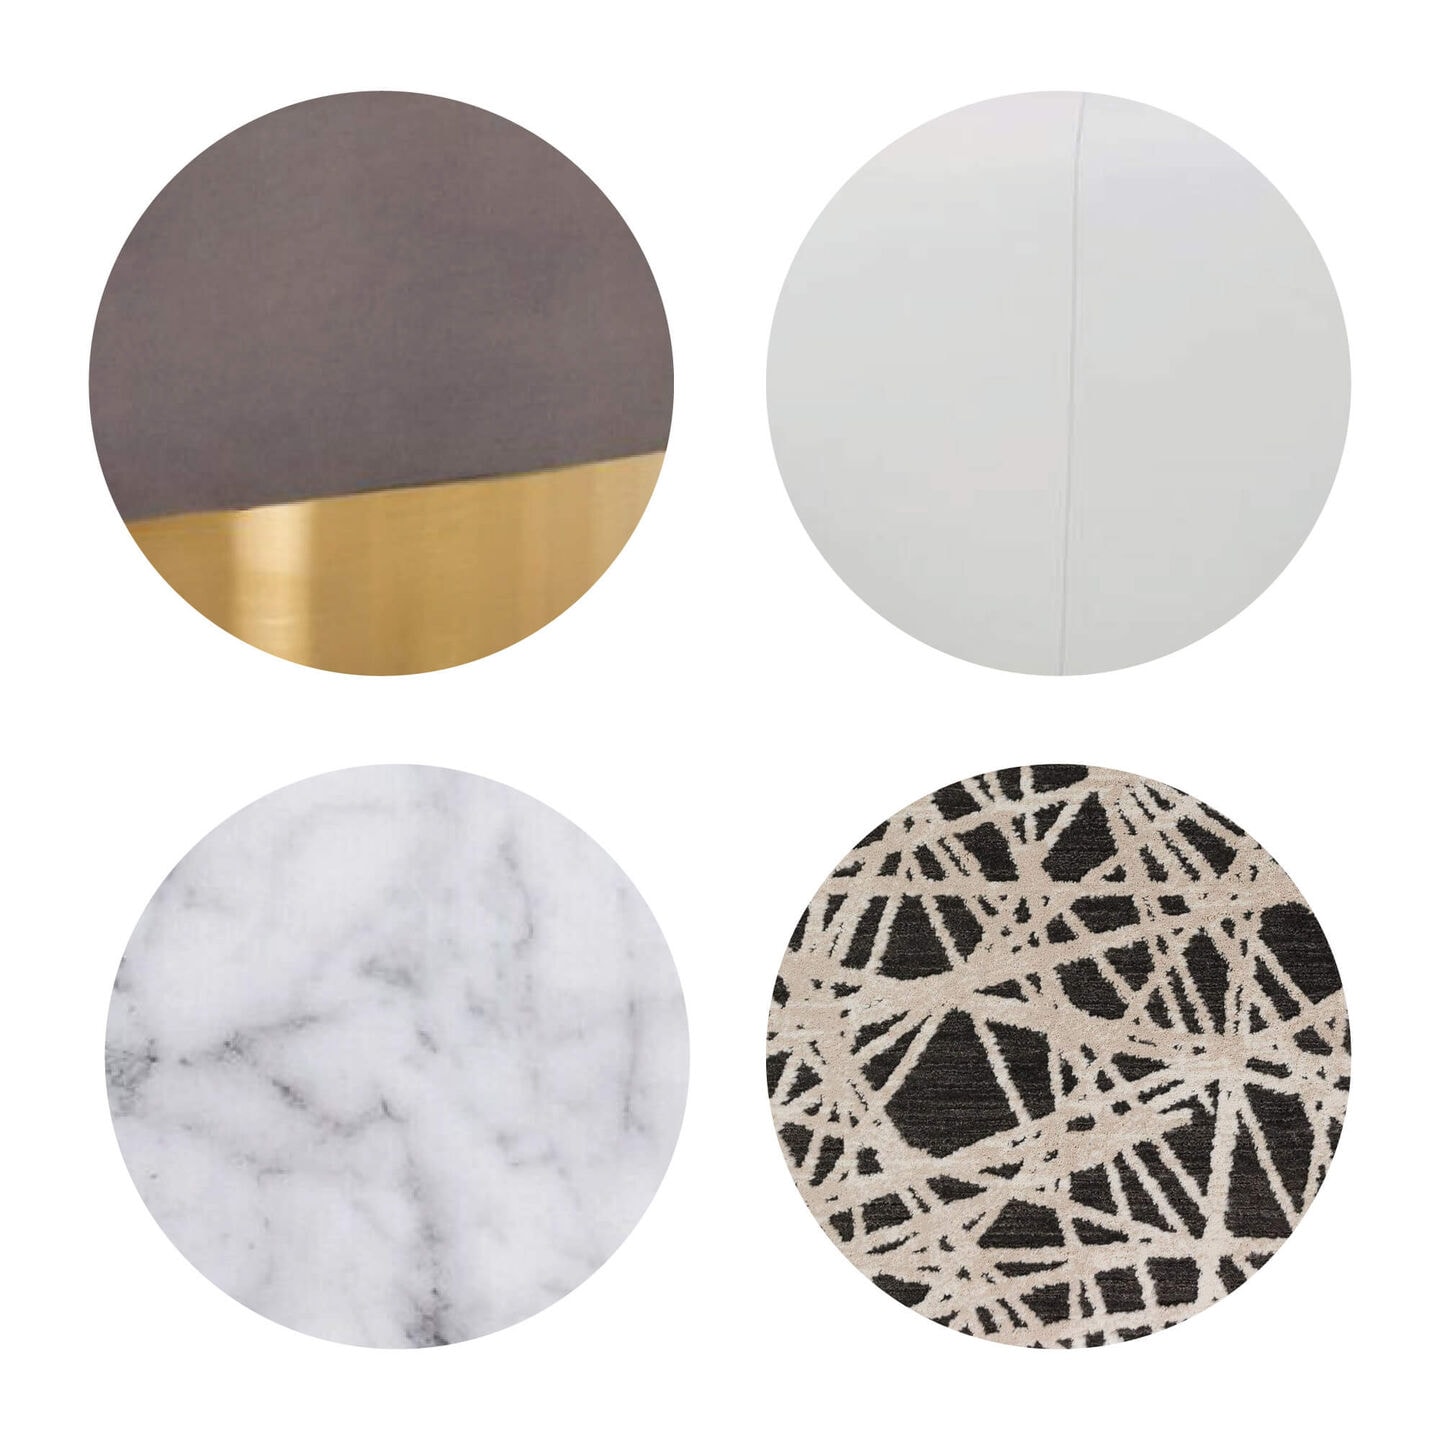 Quiet modern swatches including gold and grey, white, marble, and a black and cream pattern